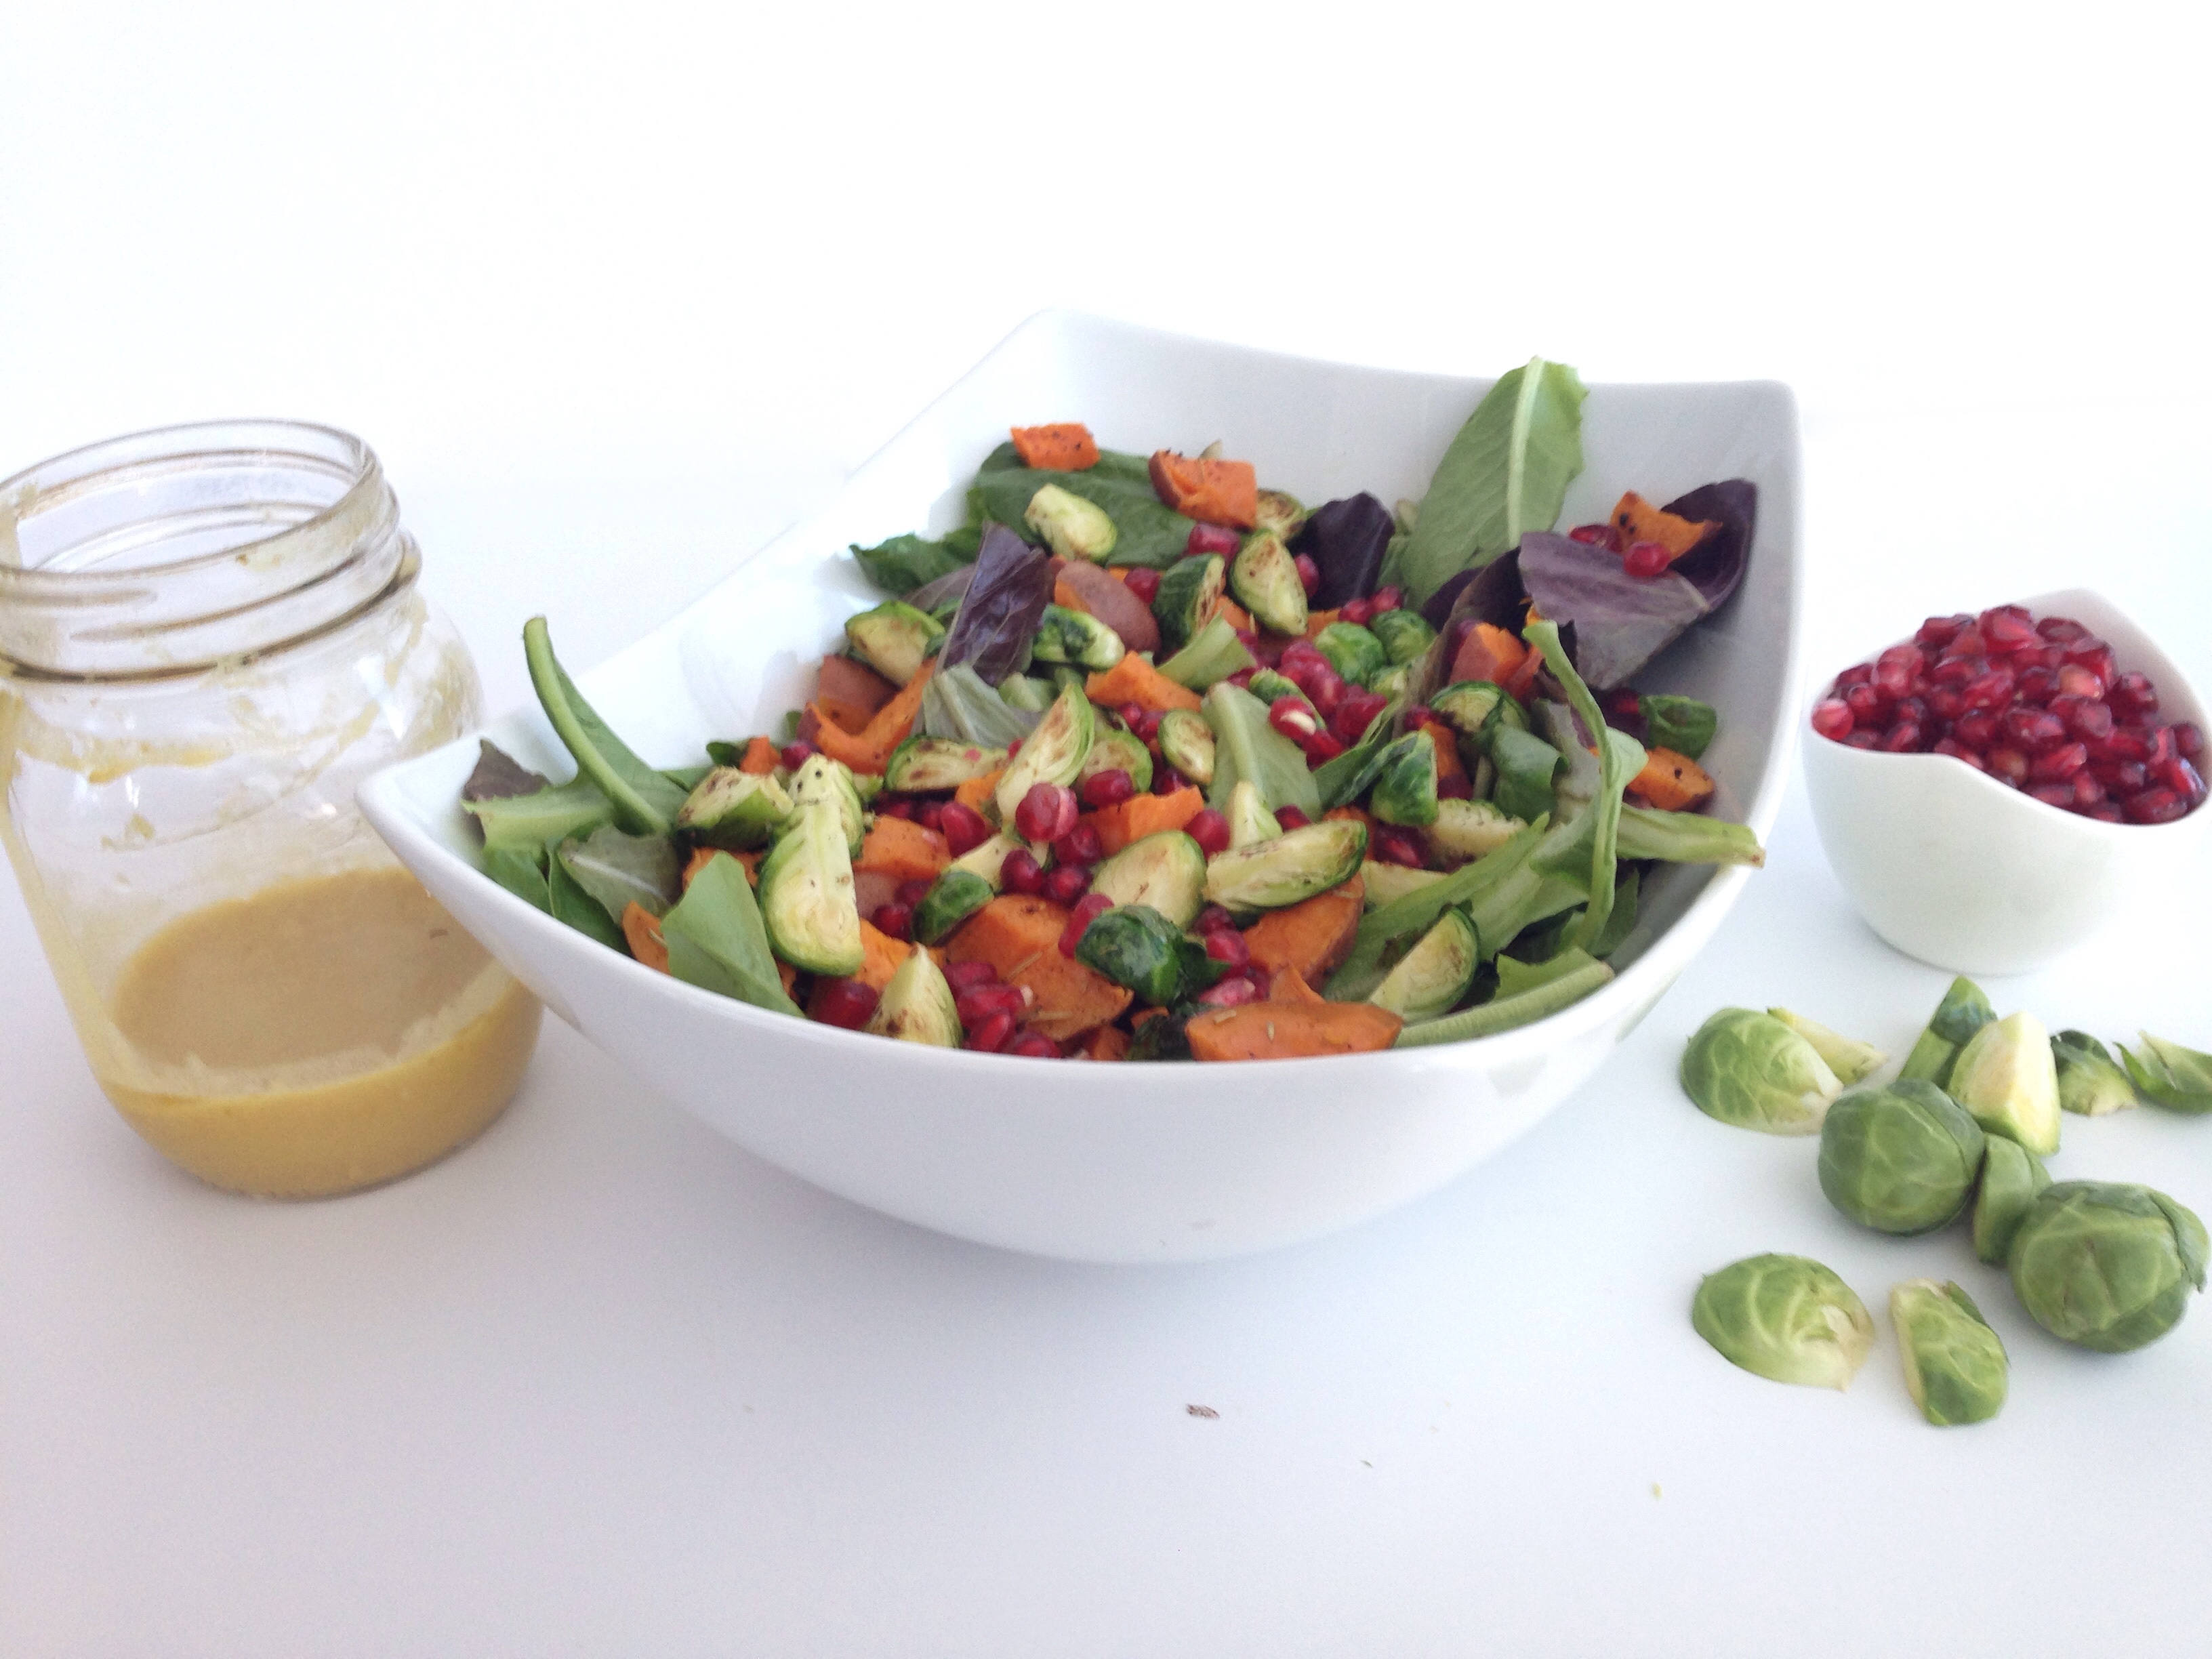 simple festive salad with dijon ginger dressing nourishing sweet potatoes brussels sprouts and pomegranate seeds